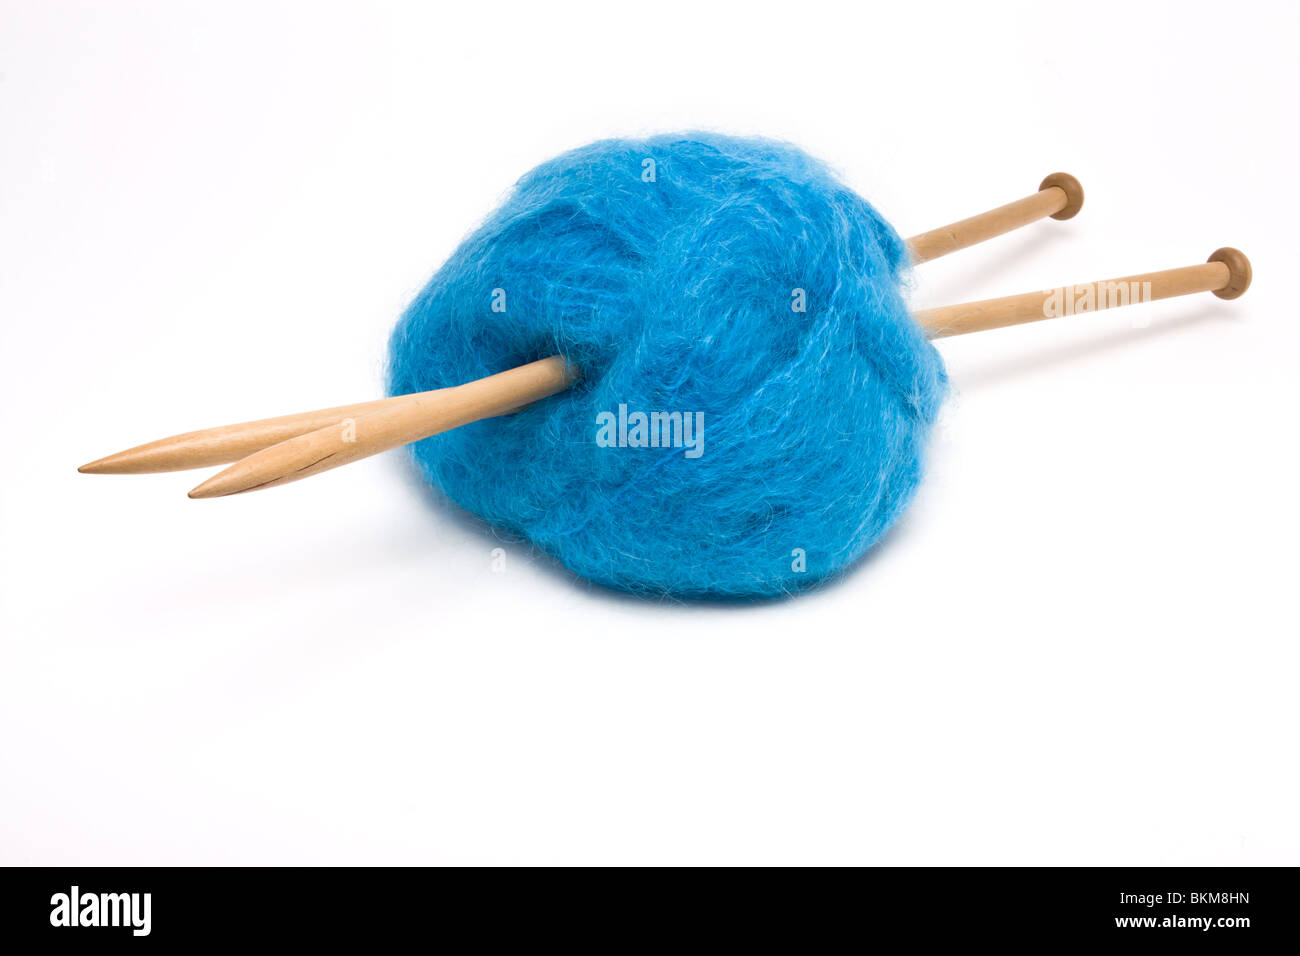 A large ball of blue mohair wool pierced with large wooden knitting needles against white. Stock Photo